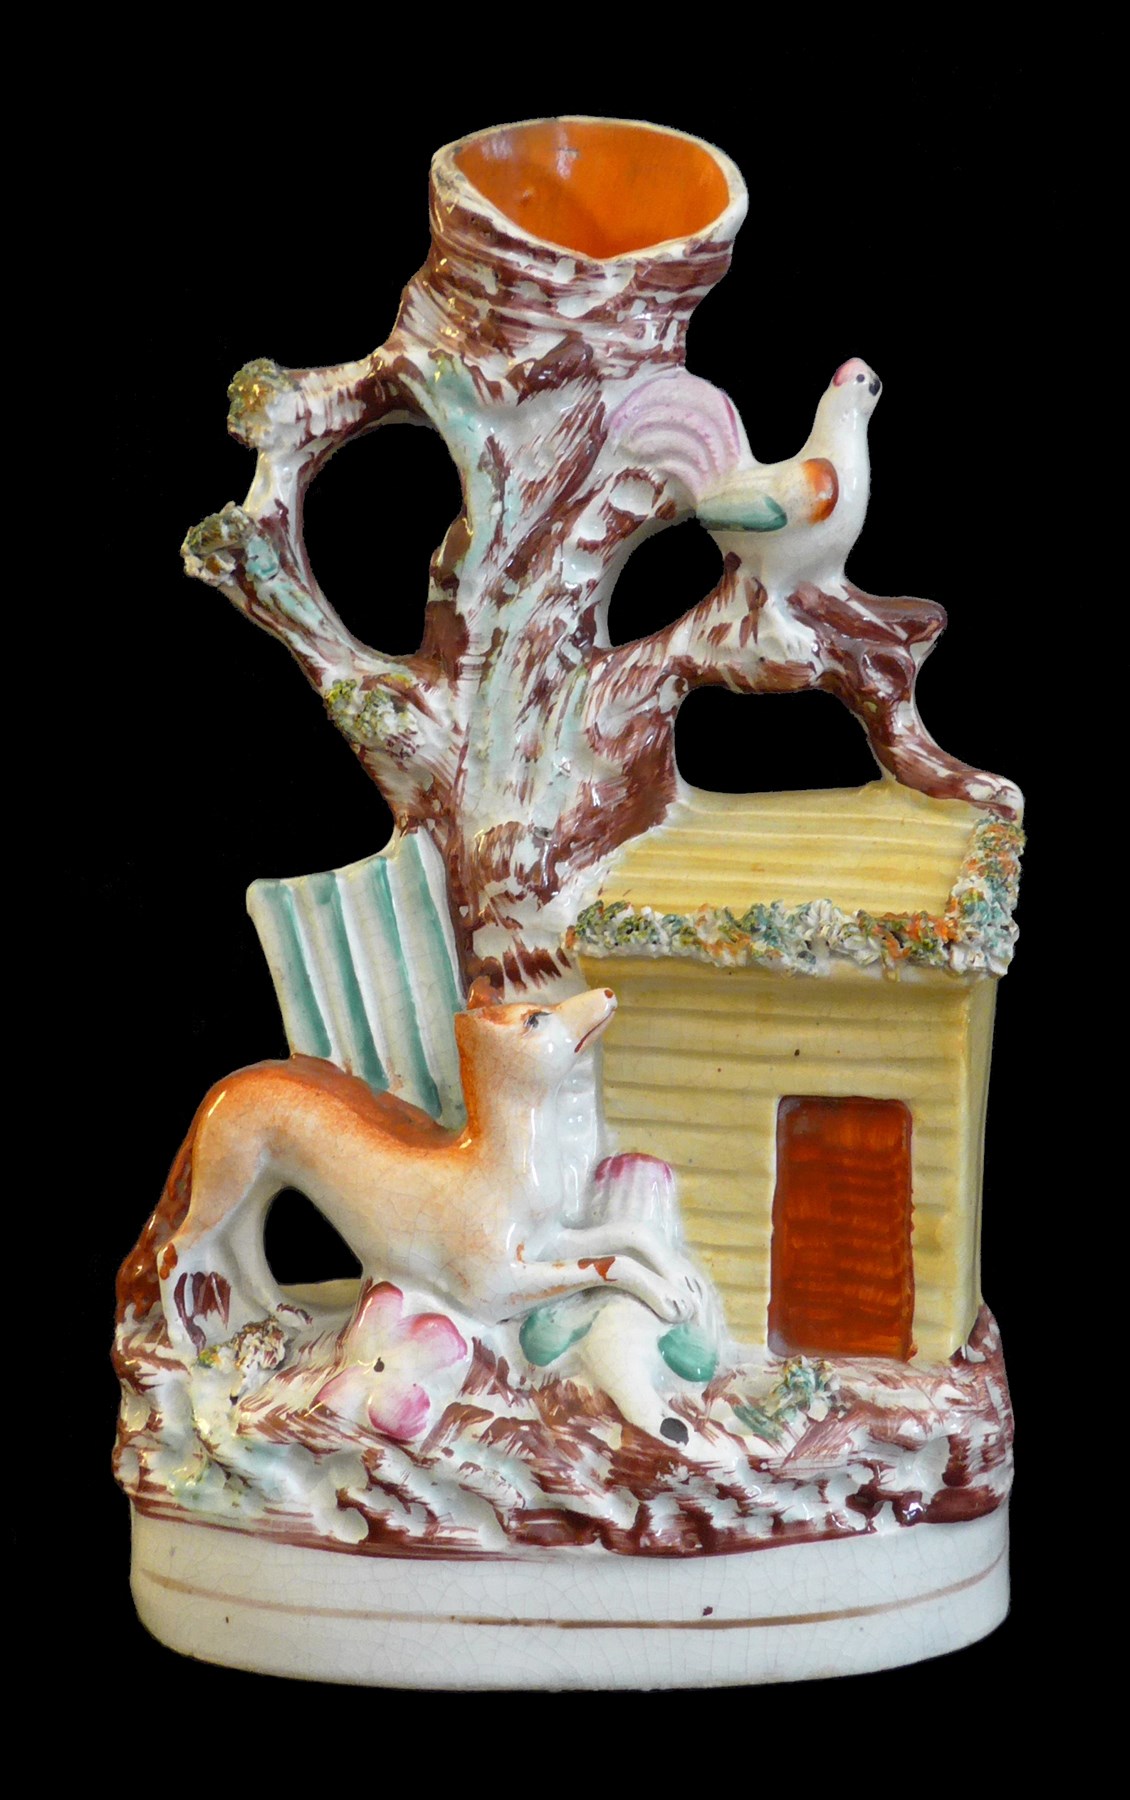 multicolored ceramic figure with fox looking up at rooster in tree; body of tree is a vase